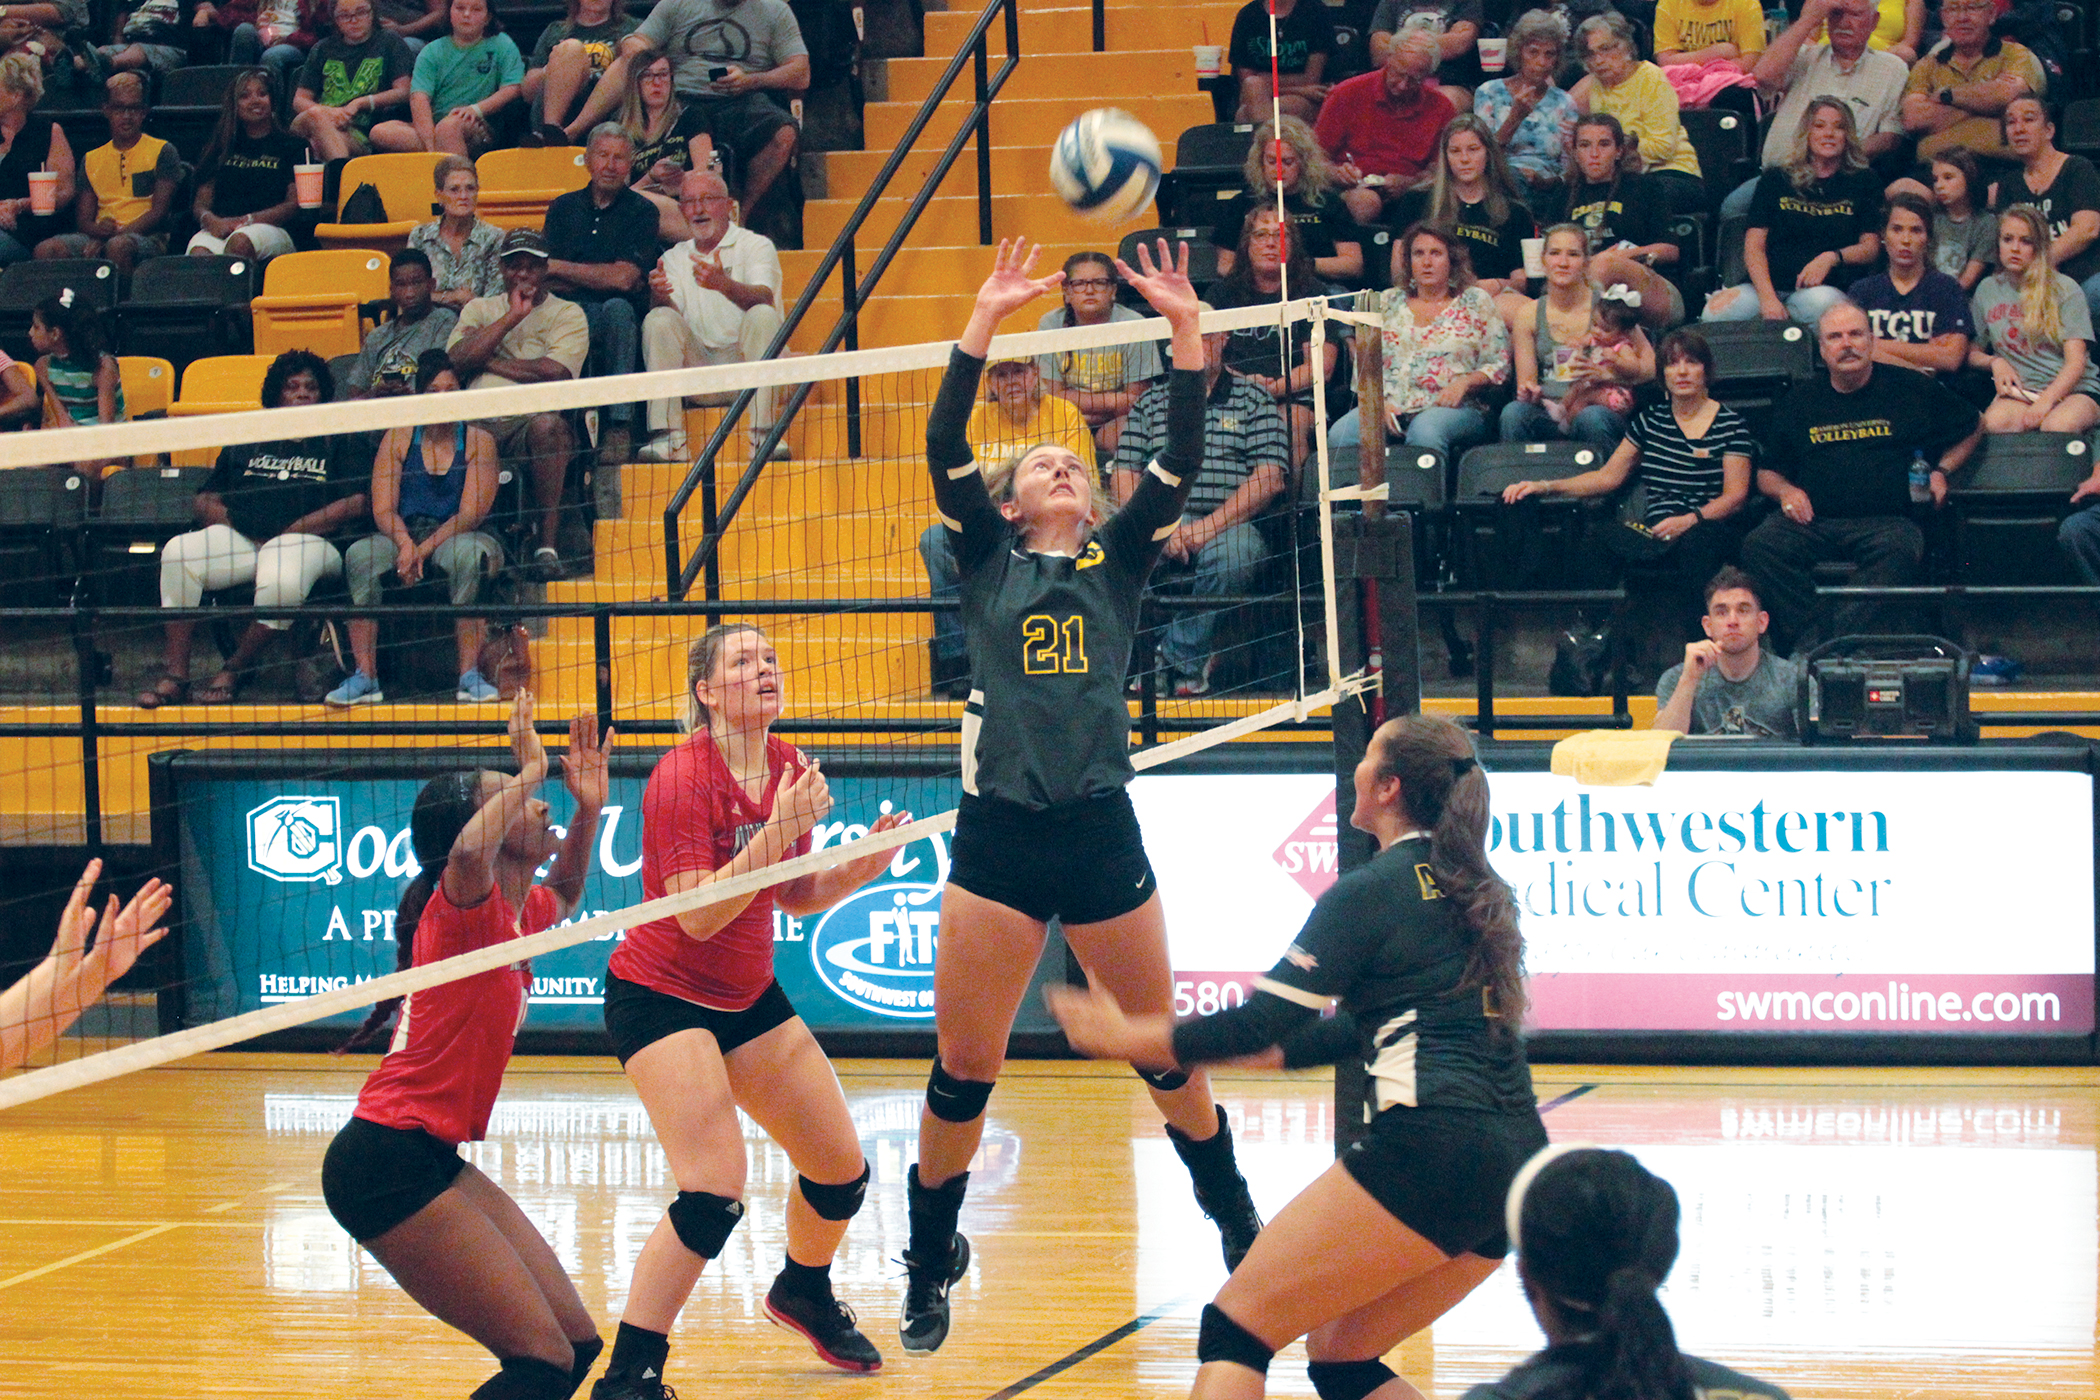 Volleyball Season Ends: Brook Conley Notches 17th Double-Double